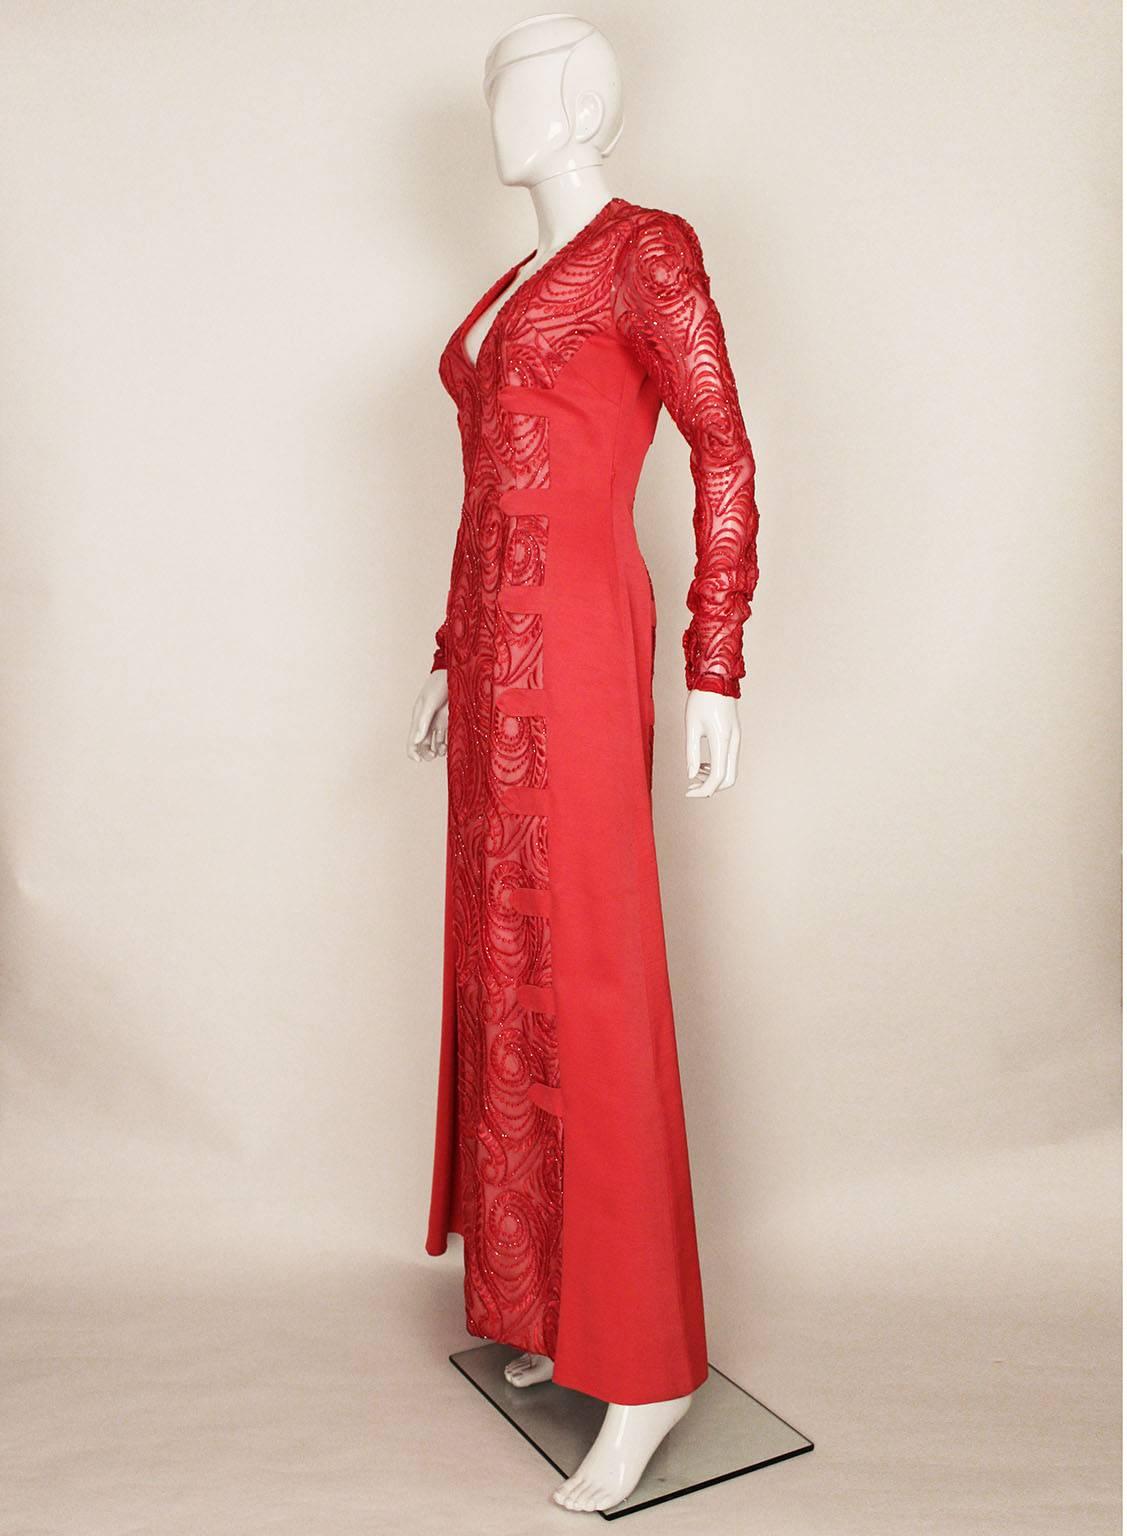 A stunning gown by Dior from the 1960s. In a wonderful rose pink colour the gown has a central devoree panel on the front and back . The sleeves are also devoree,and the sides panels with detail are pink silk.There are two slits on either side of